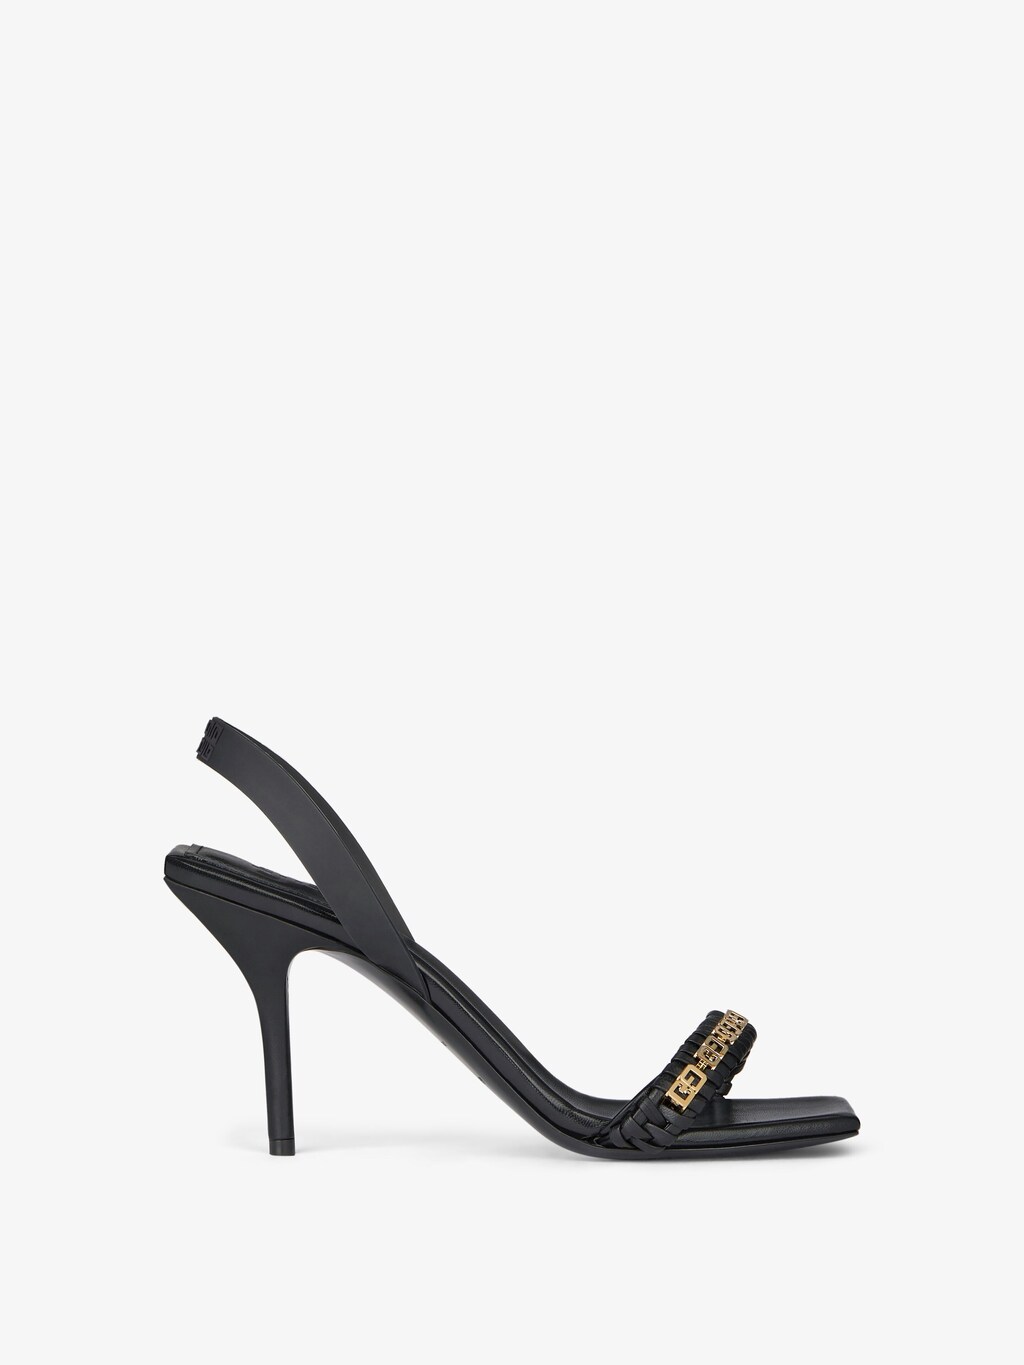 givenchy.com | G Woven sandals in braided leather with chain